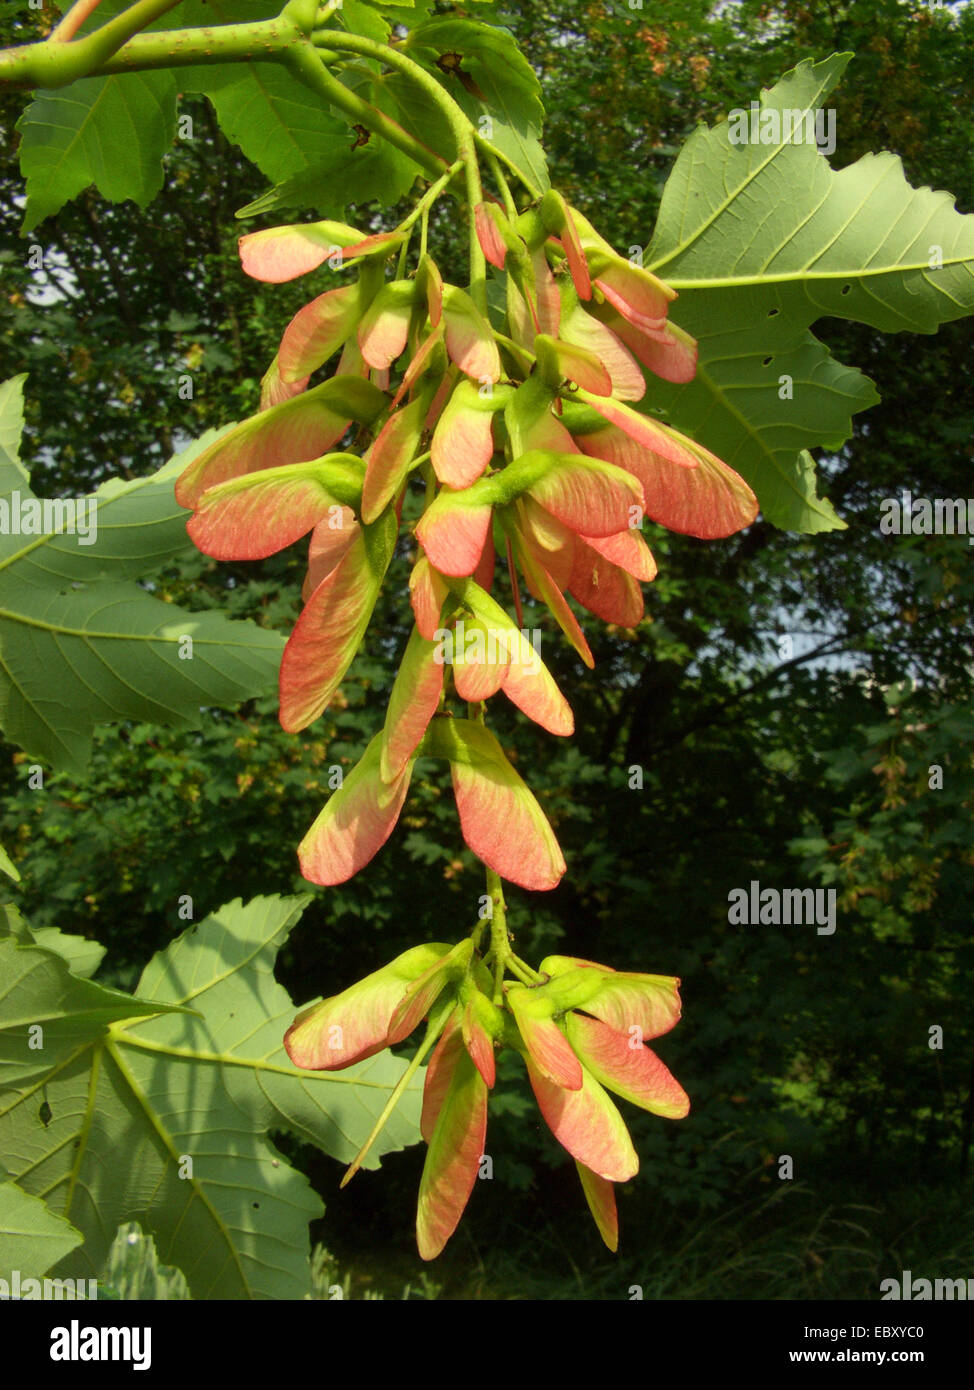 sycamore maple, great maple (Acer pseudoplatanus), ripe fruits, Germany Stock Photo